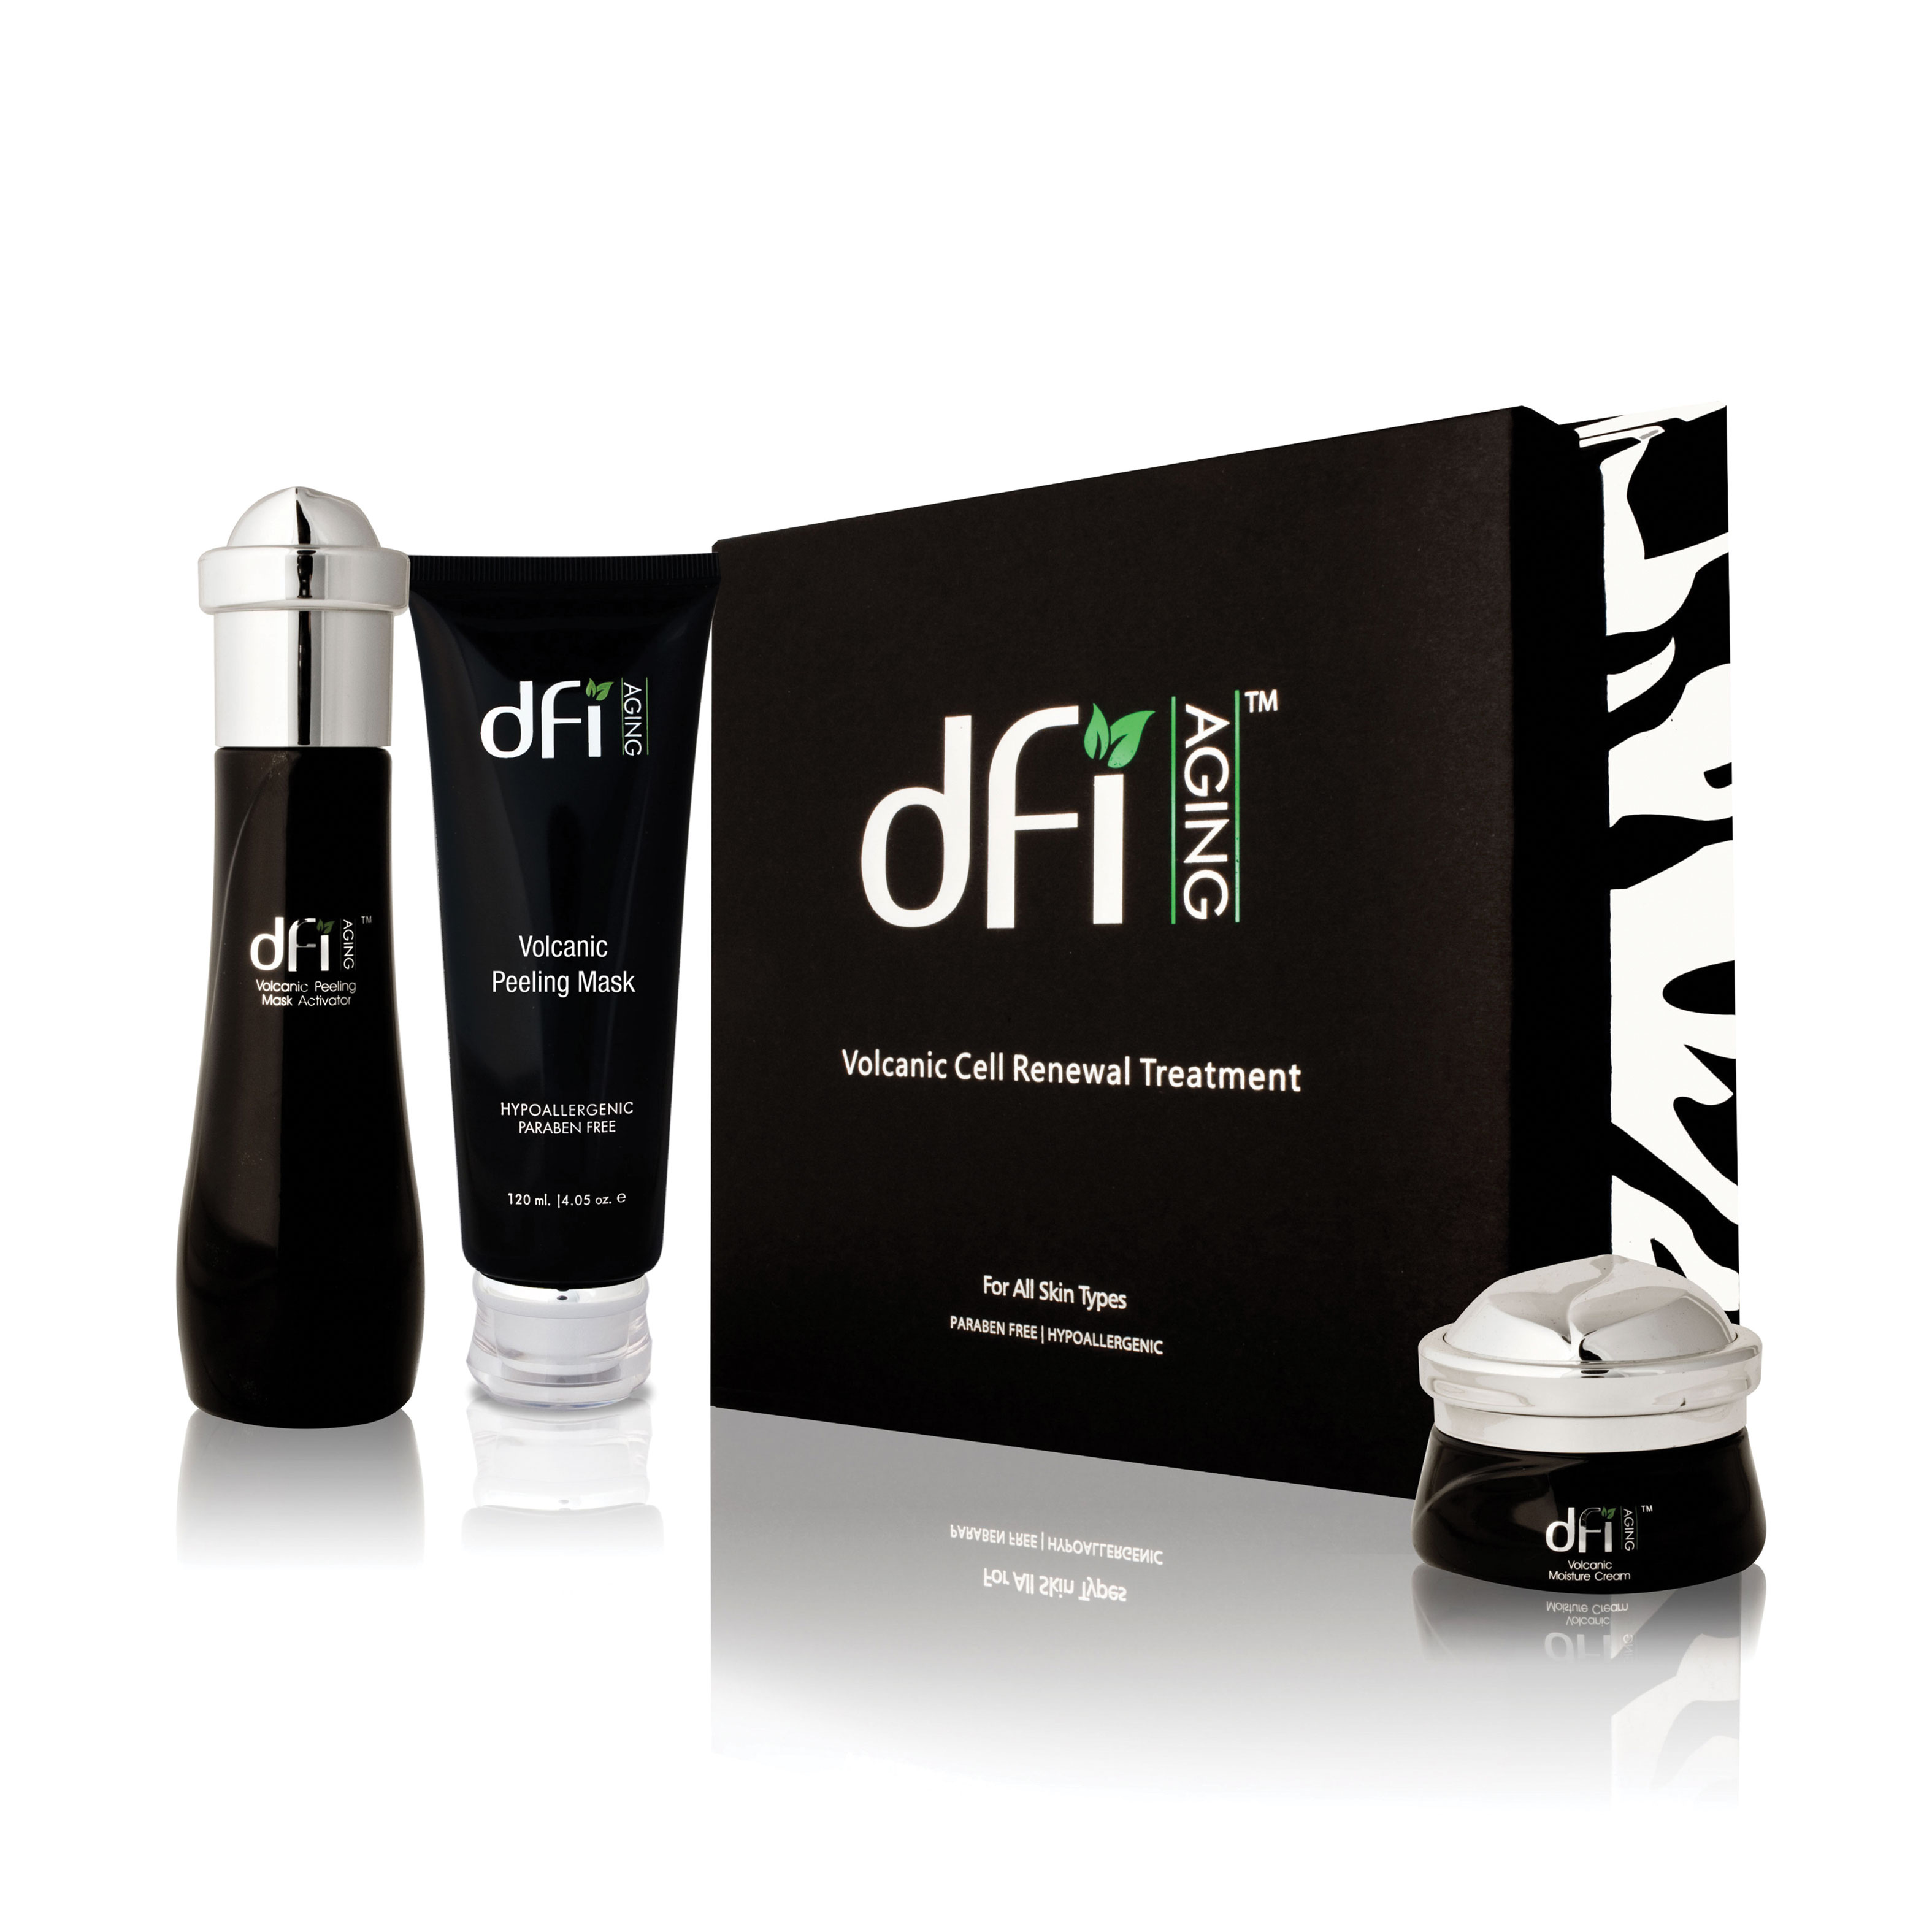 Product Branding and Packaging Design for dfi Aging Skincare's Volcanic Cell Renewal System